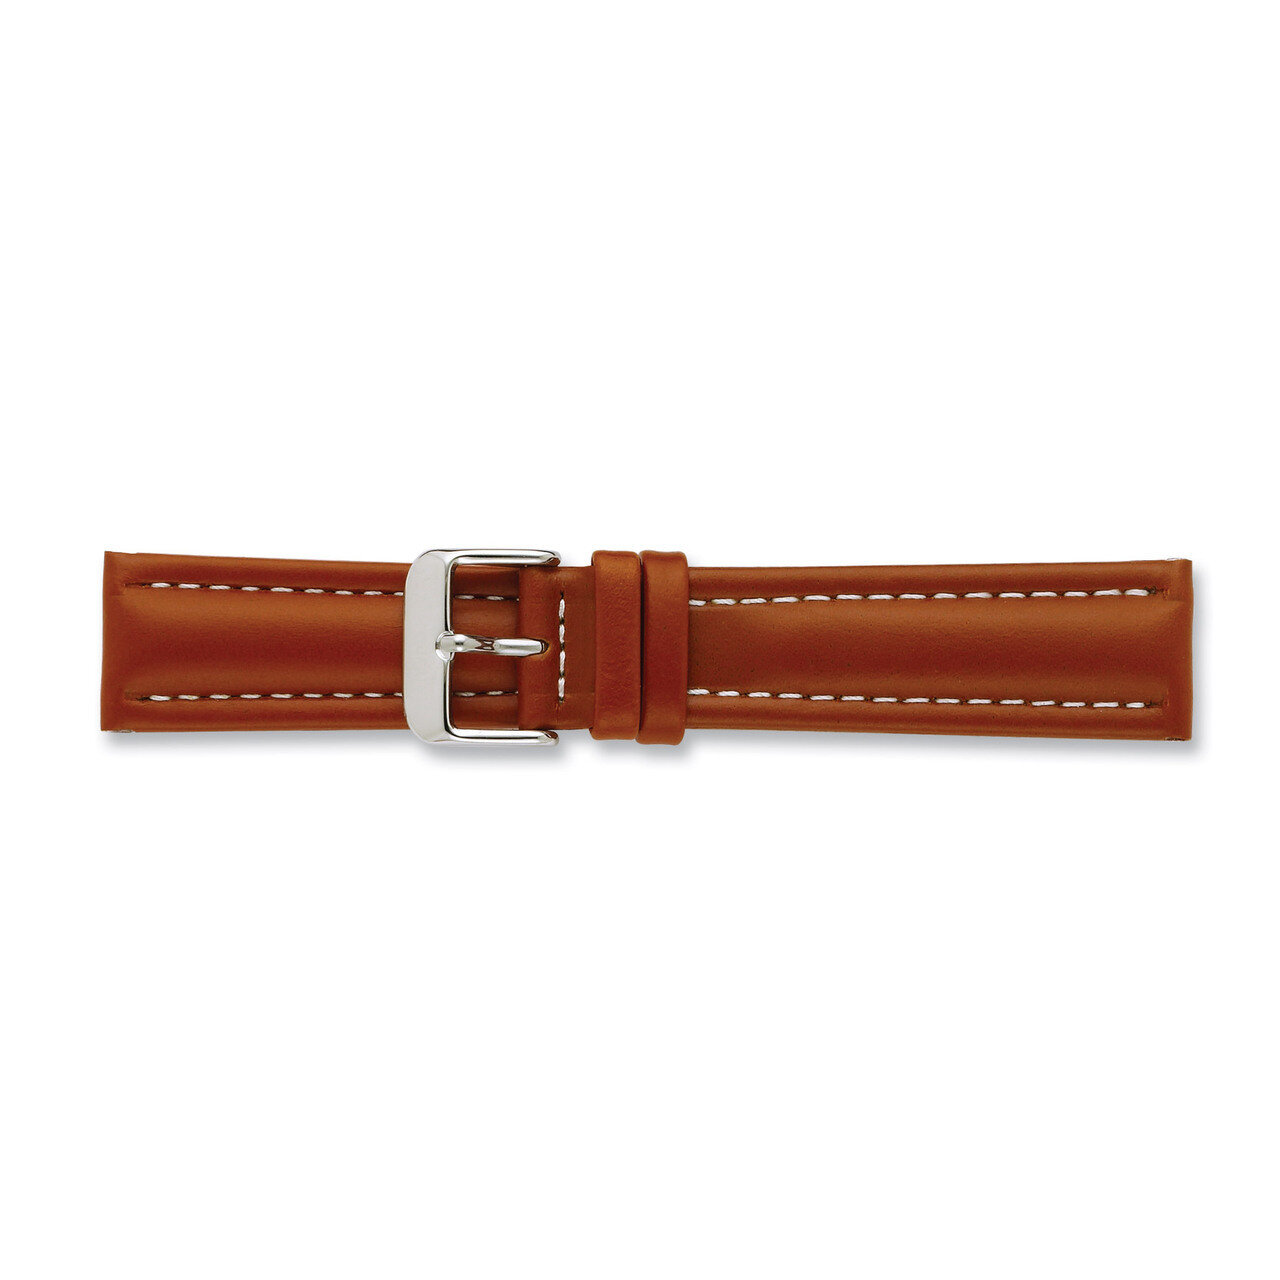 18mm Saddle Oil Tanned Leather Watch Band 7.5 Inch Silver-tone Buckle BAW194-18